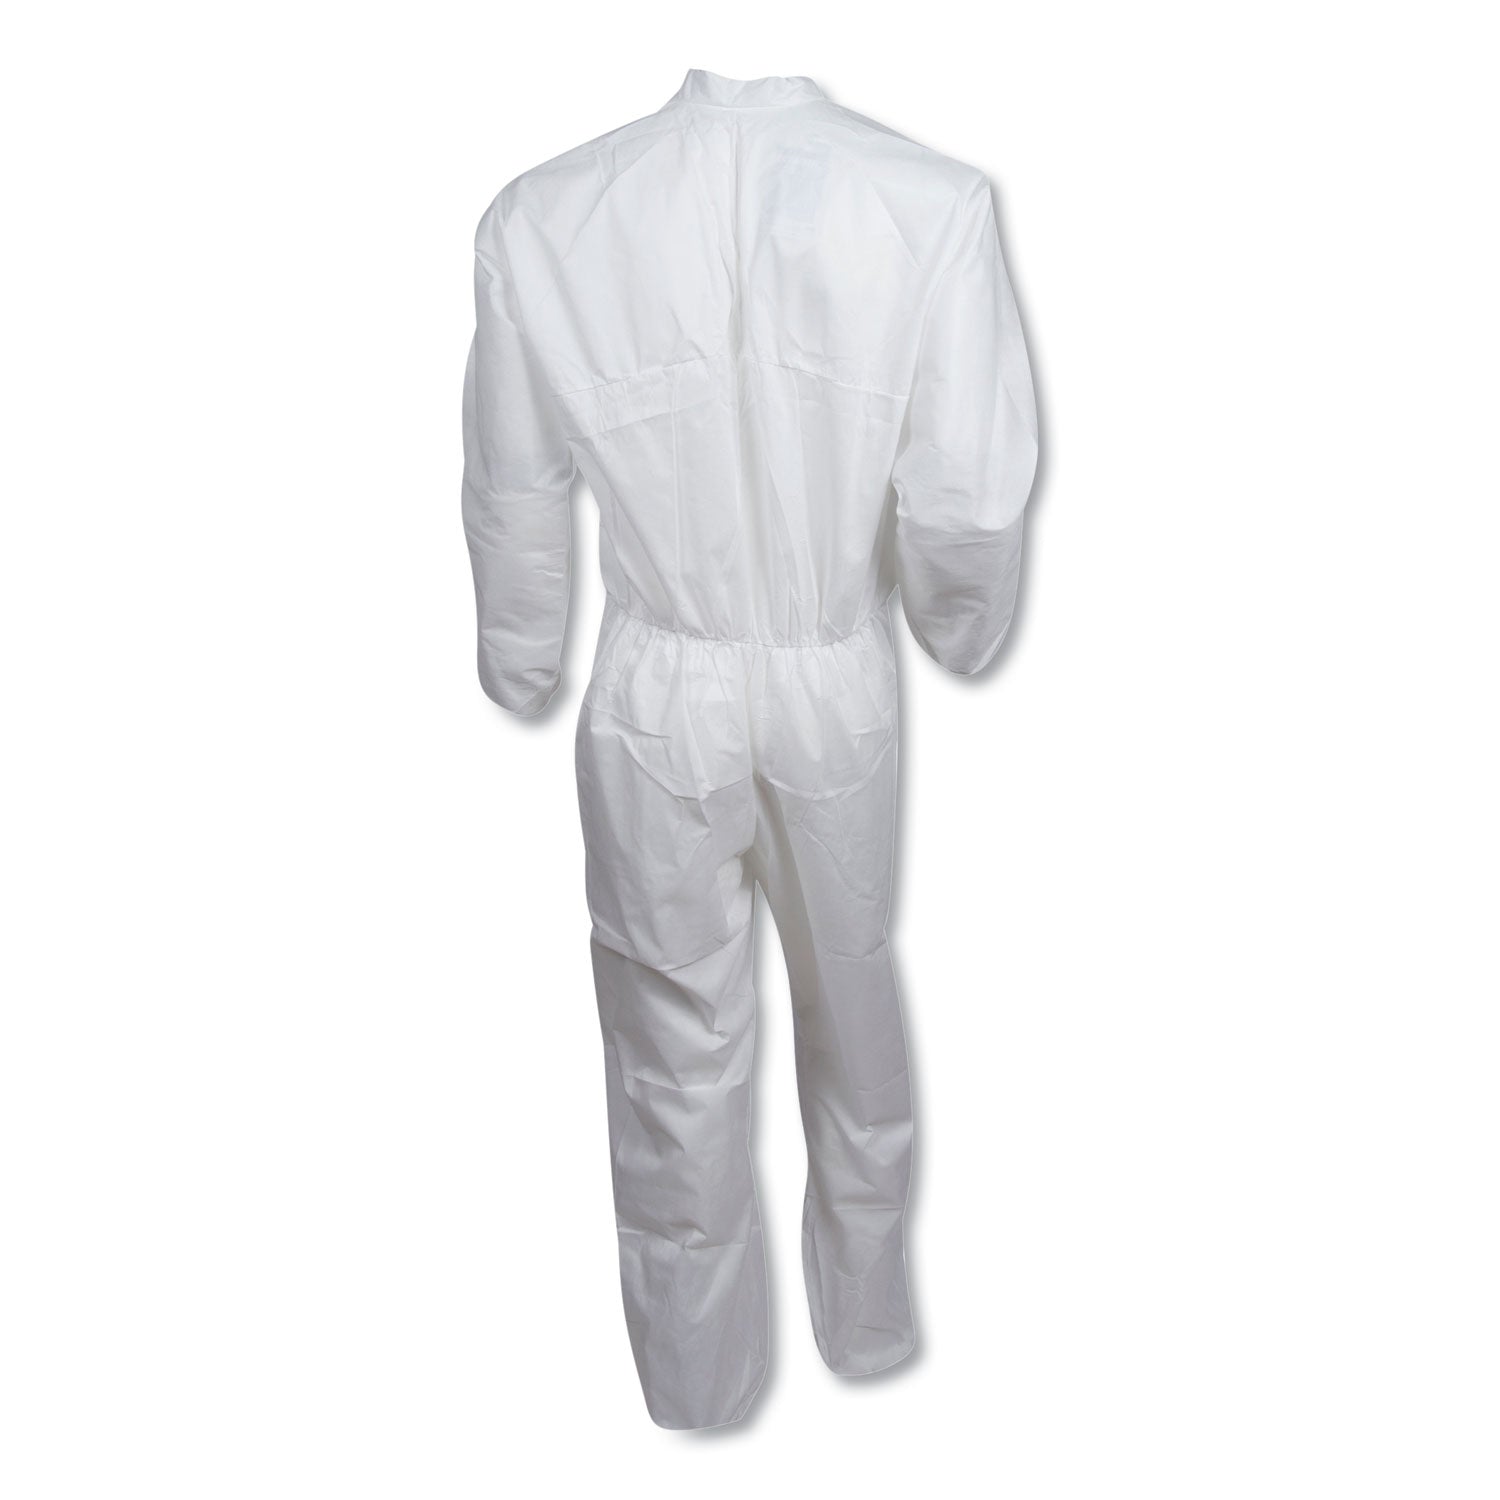 a30-elastic-back-and-cuff-coveralls-2x-large-white-25-carton_kcc46105 - 6